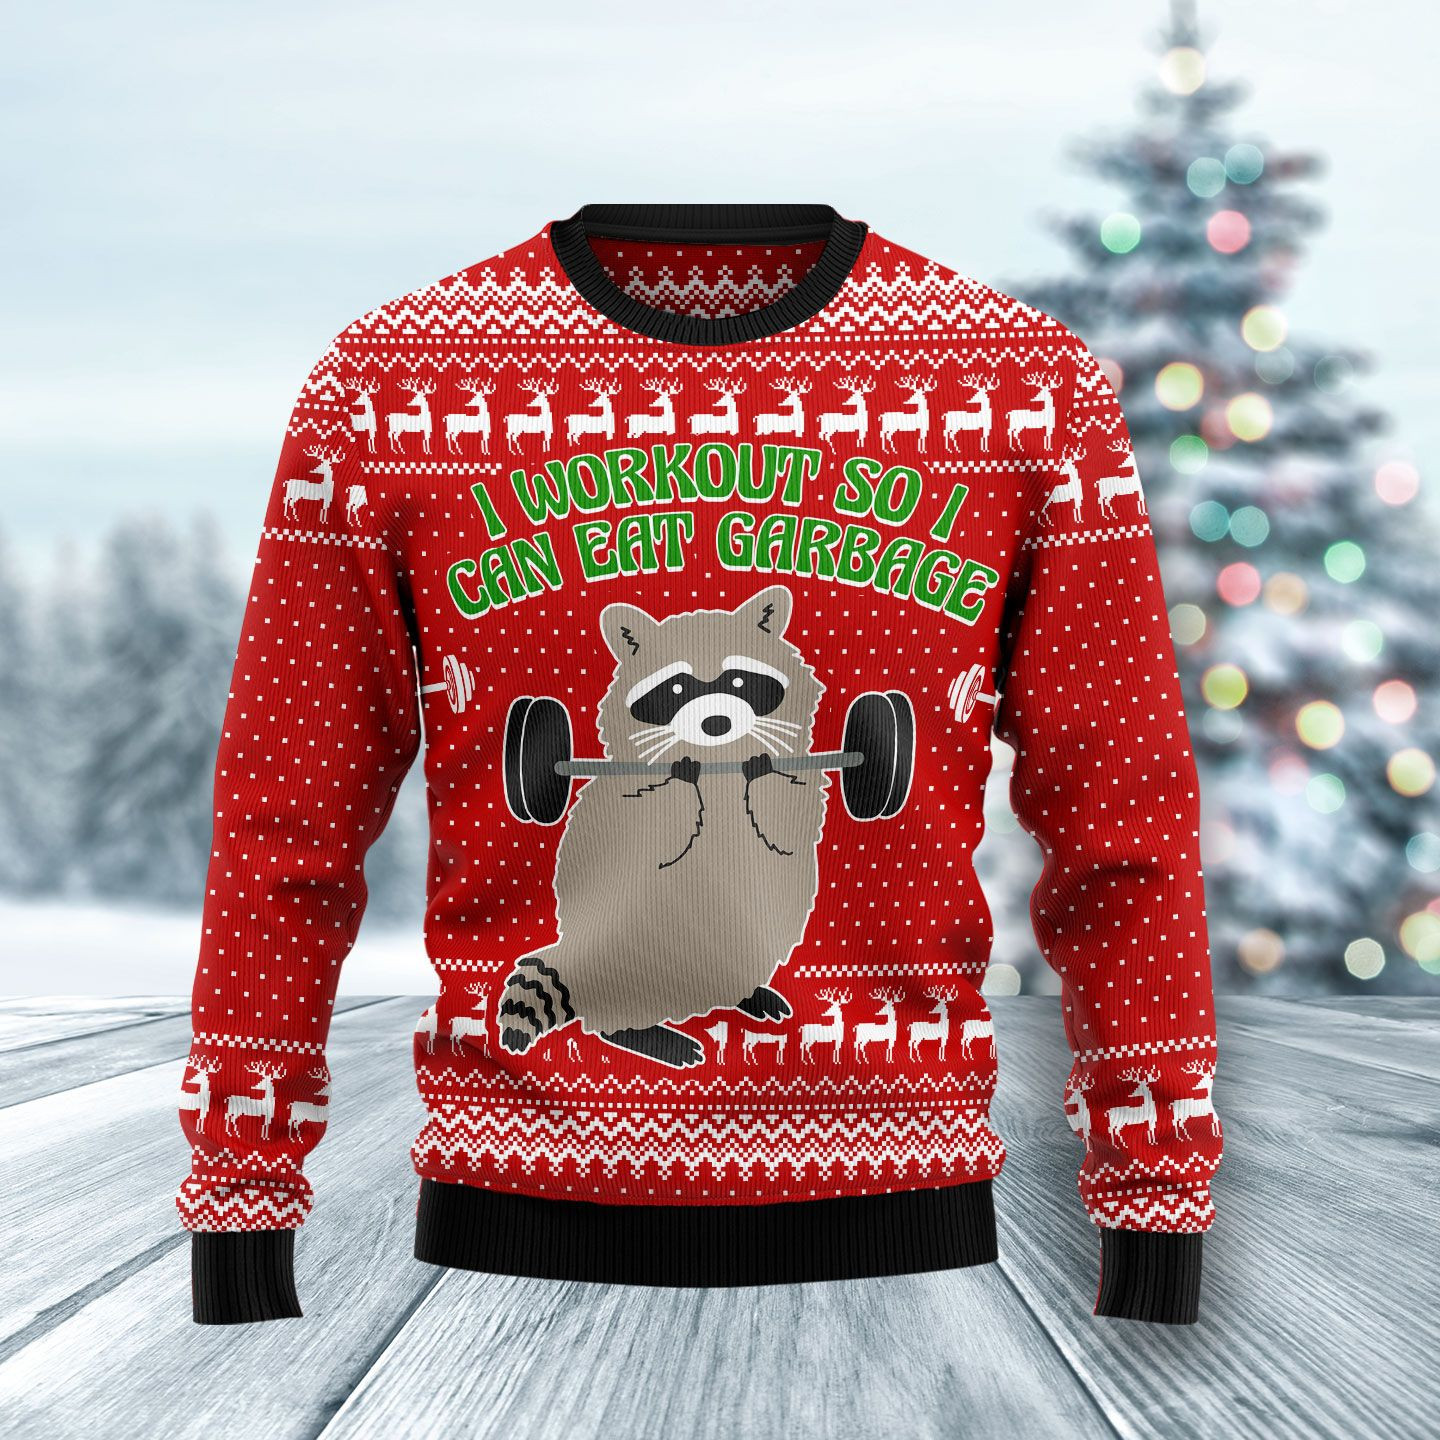 I Workout So I Can Eat Garbage Raccoon Ugly Christmas Sweater Ugly Sweater For Men Women